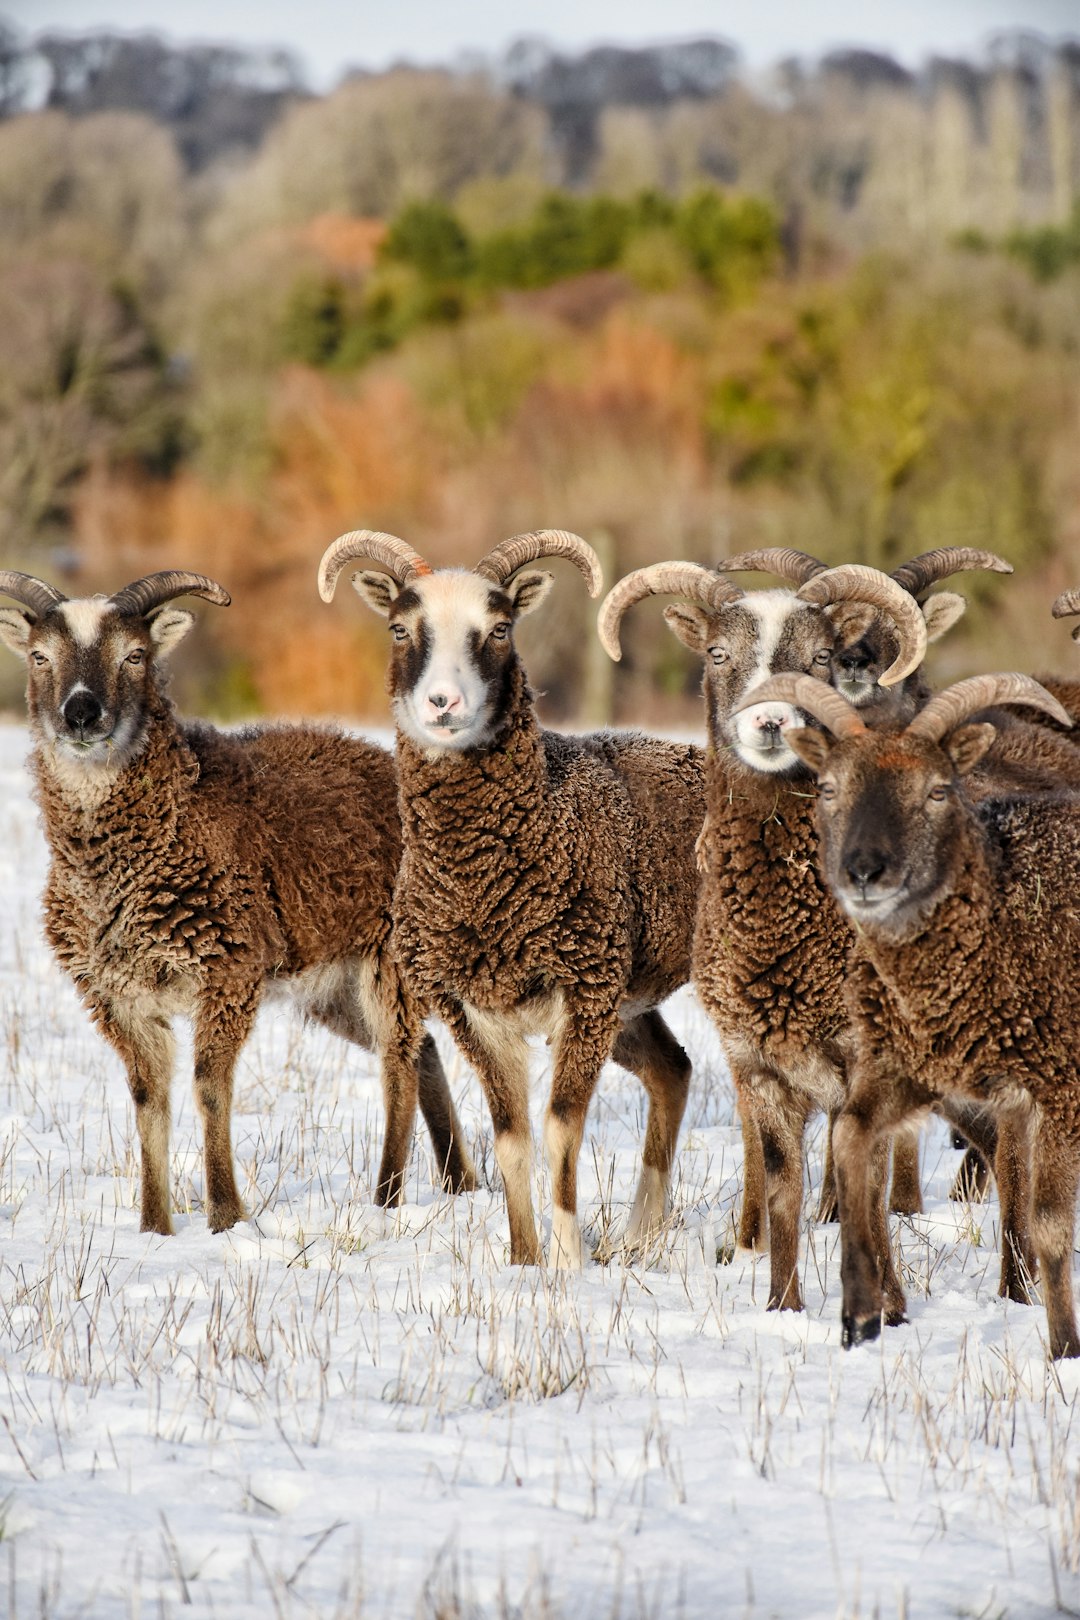 group of funny chrisalum rams in winter landscape, award winning wildlife photography in the style of different artists.